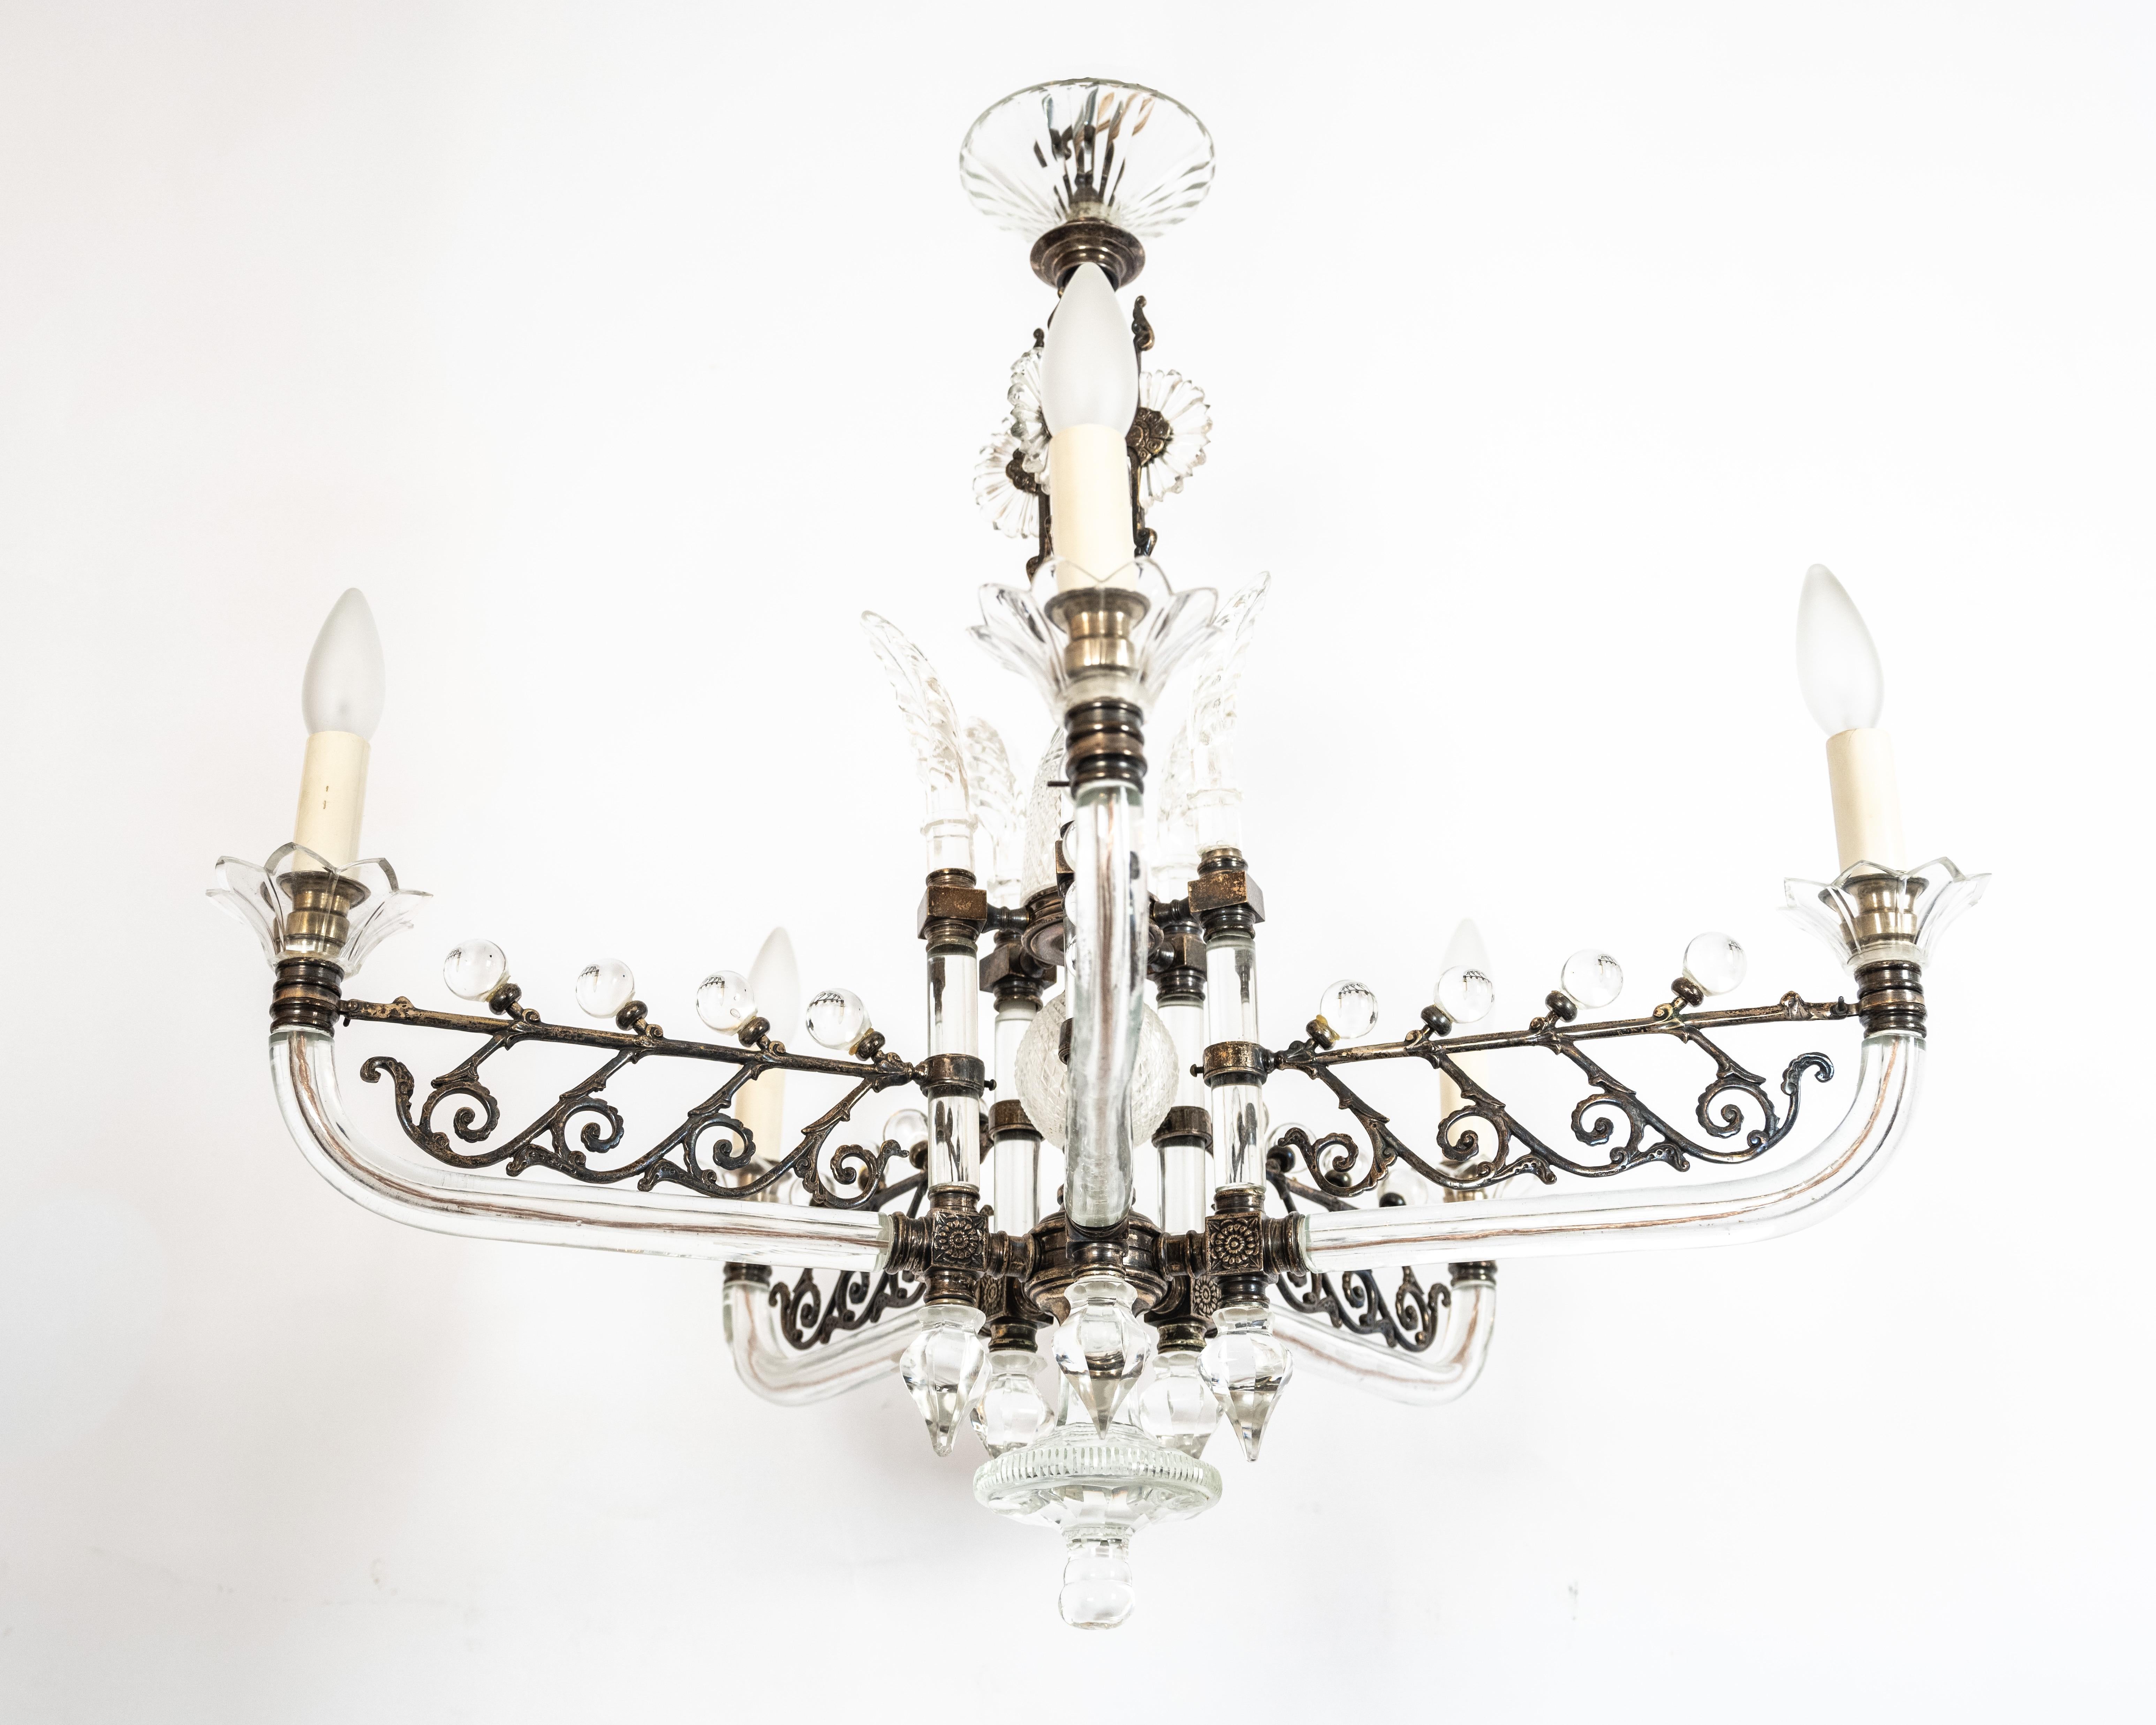 An Edwardian style chandelier by F&C Osler. Five silver embellished glass arms support candelabra sockets. Ornate silver lugs terminate in cut crystal elements. The center support features multiple cut crystal and cast glass elements. Silver